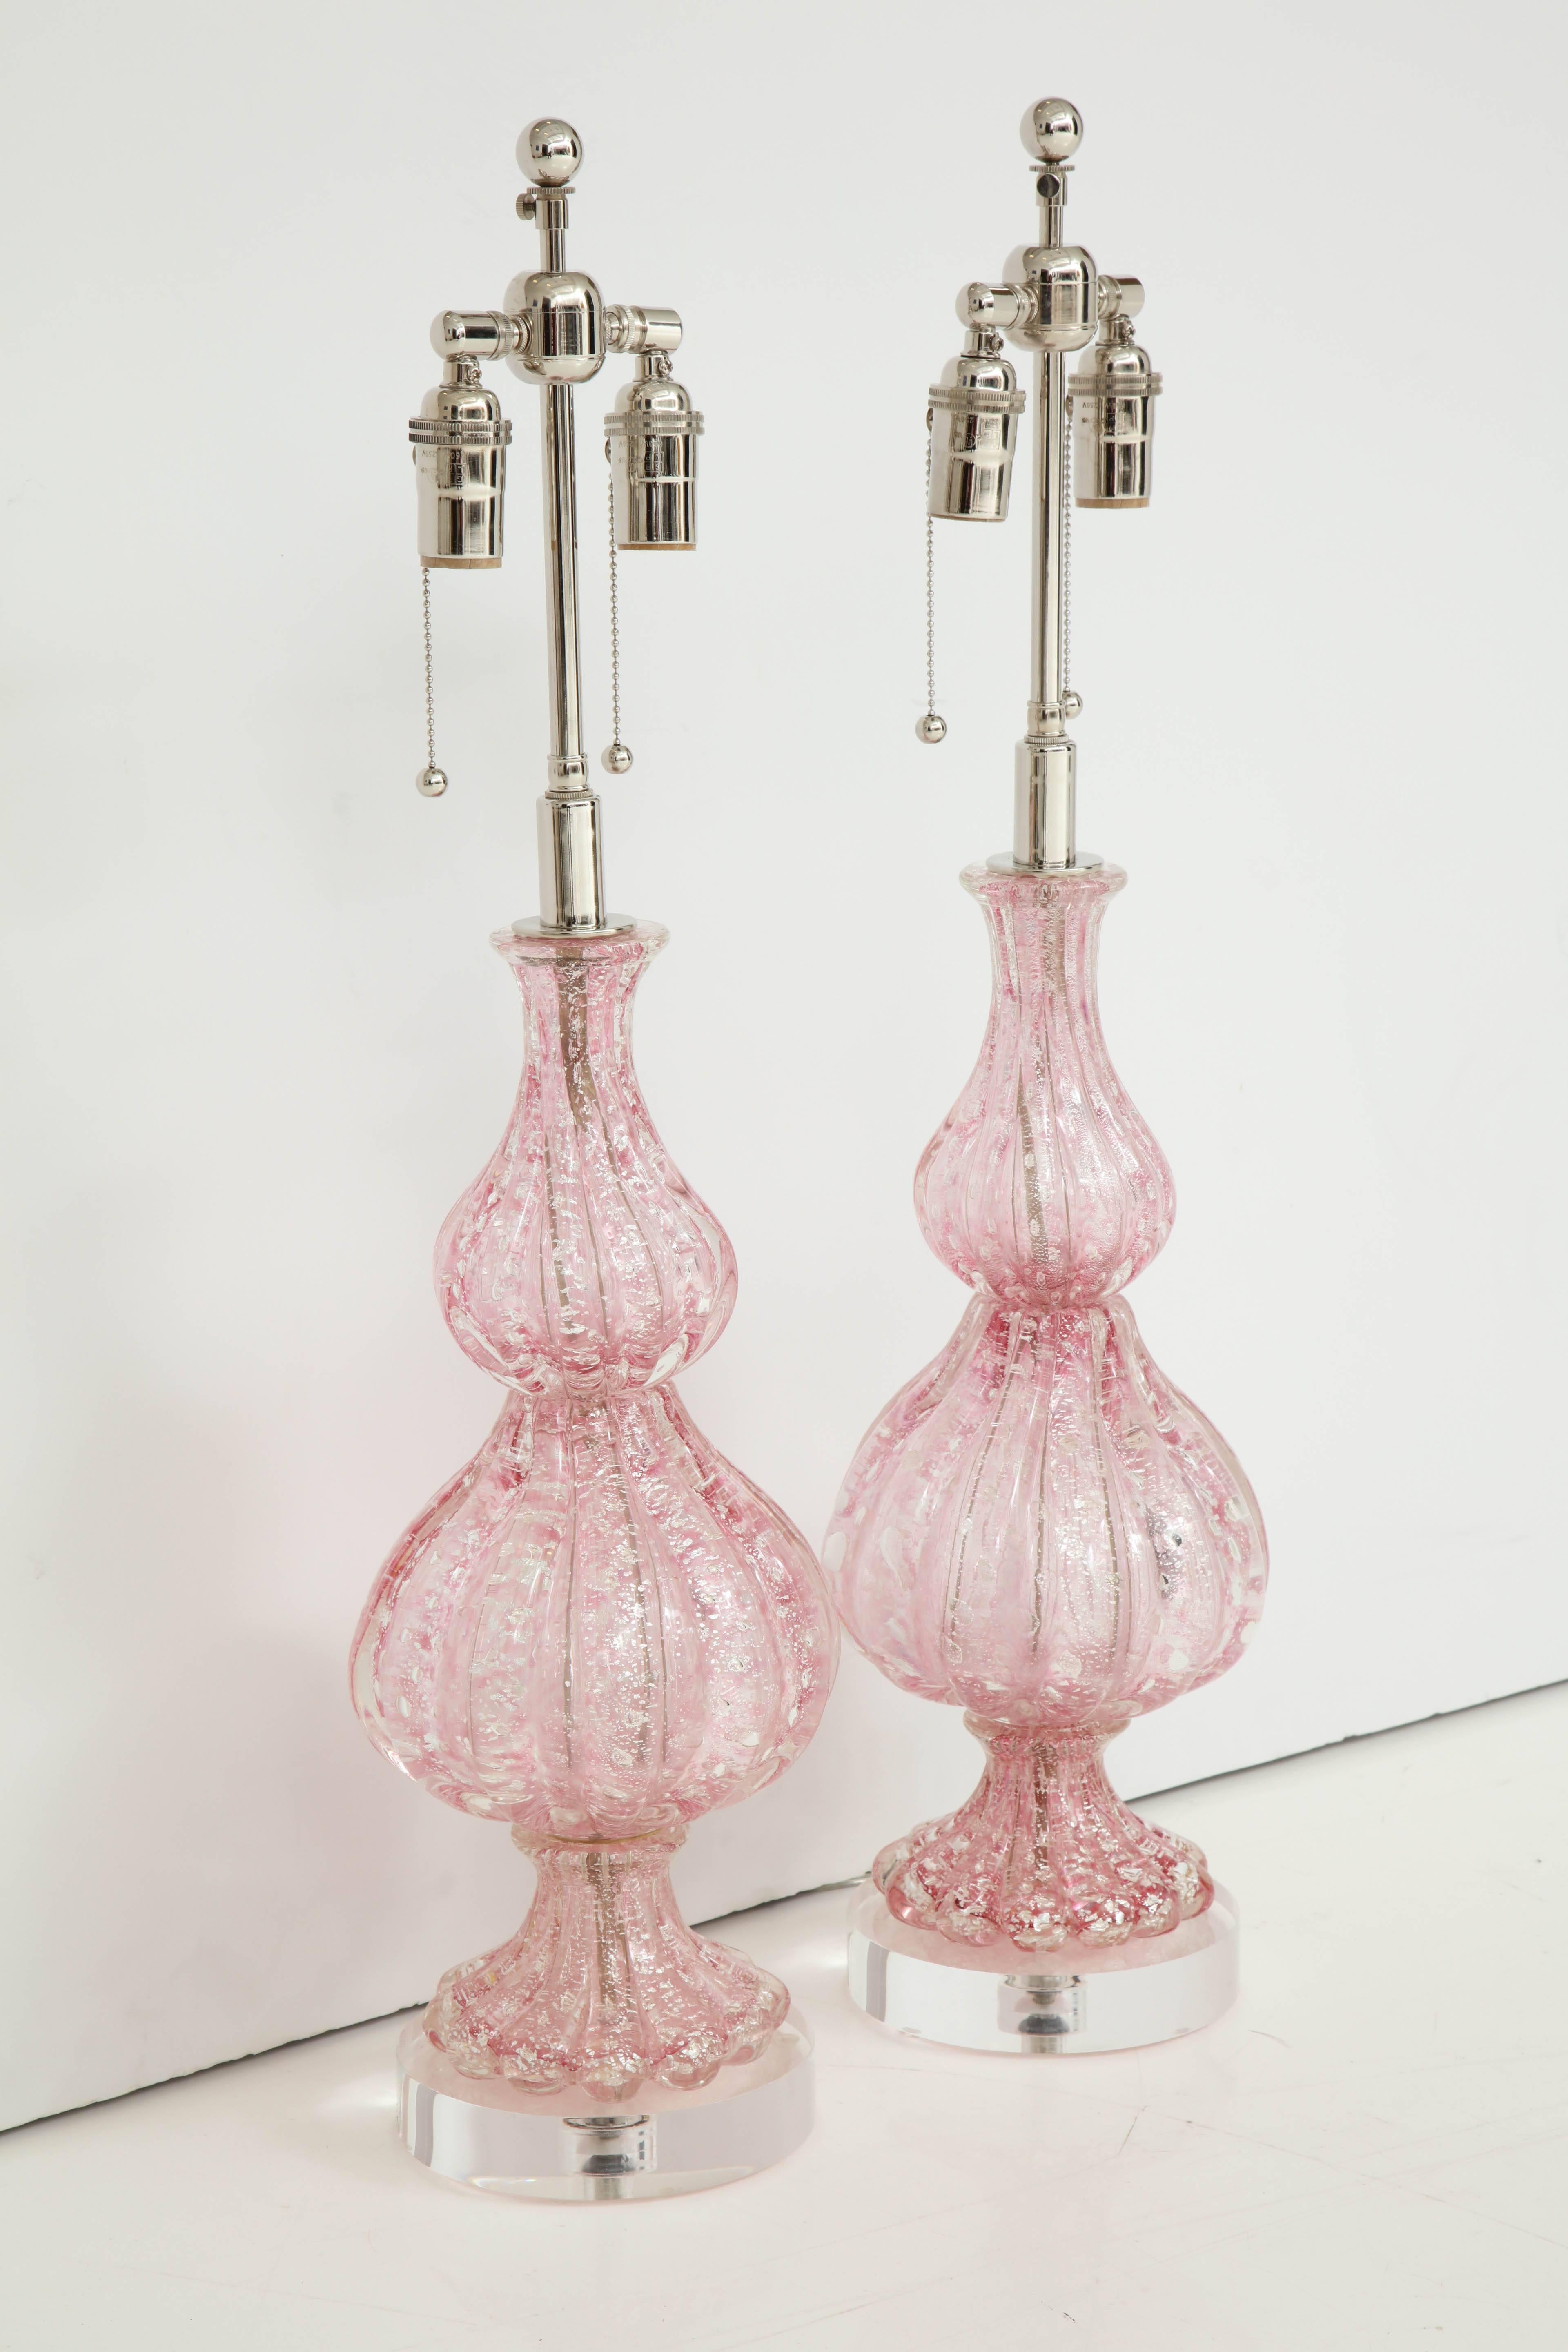 1950s Pair of large Pink Murano lamps by Barovier.
The glass lamp bodies have silver flecks controlled throughout and they are mounted on thick Lucite bases.
The lamps have been newly rewired for the US with polished Nickel double clusters that